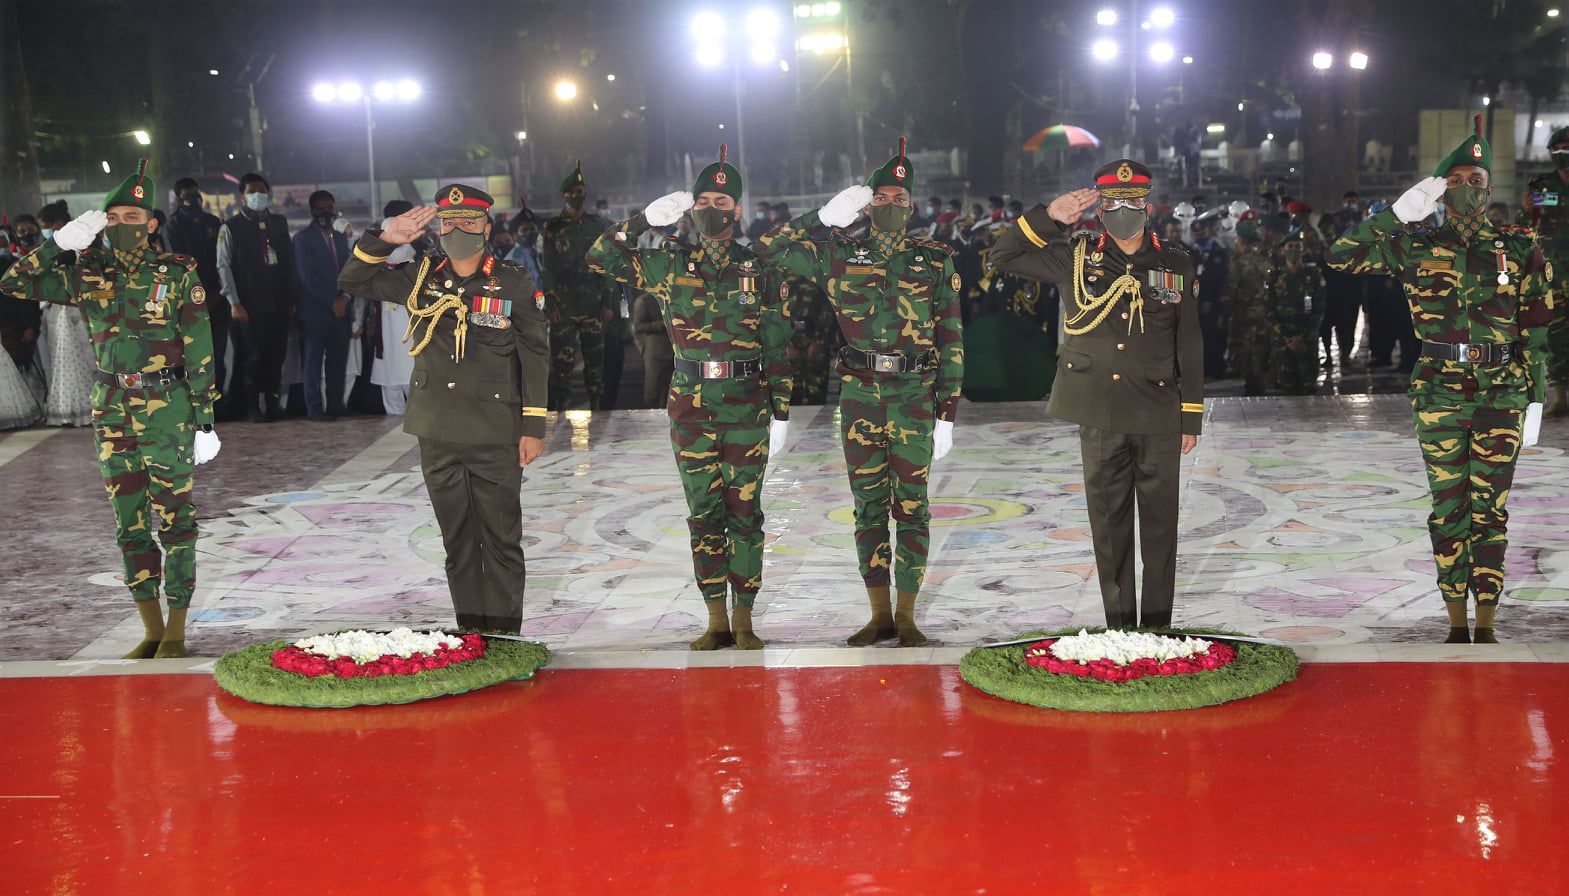 On behalf of the President and the Prime Minister, their military
secretaries paid the homage by placing wreaths at the Central Shaheed
Minar here at one minute past zero hours while the immortal song on
Amar Ekushey-"Amar Bhaiyer Rakte Rangano Ekushey February"- was being
played on the loudspeaker.